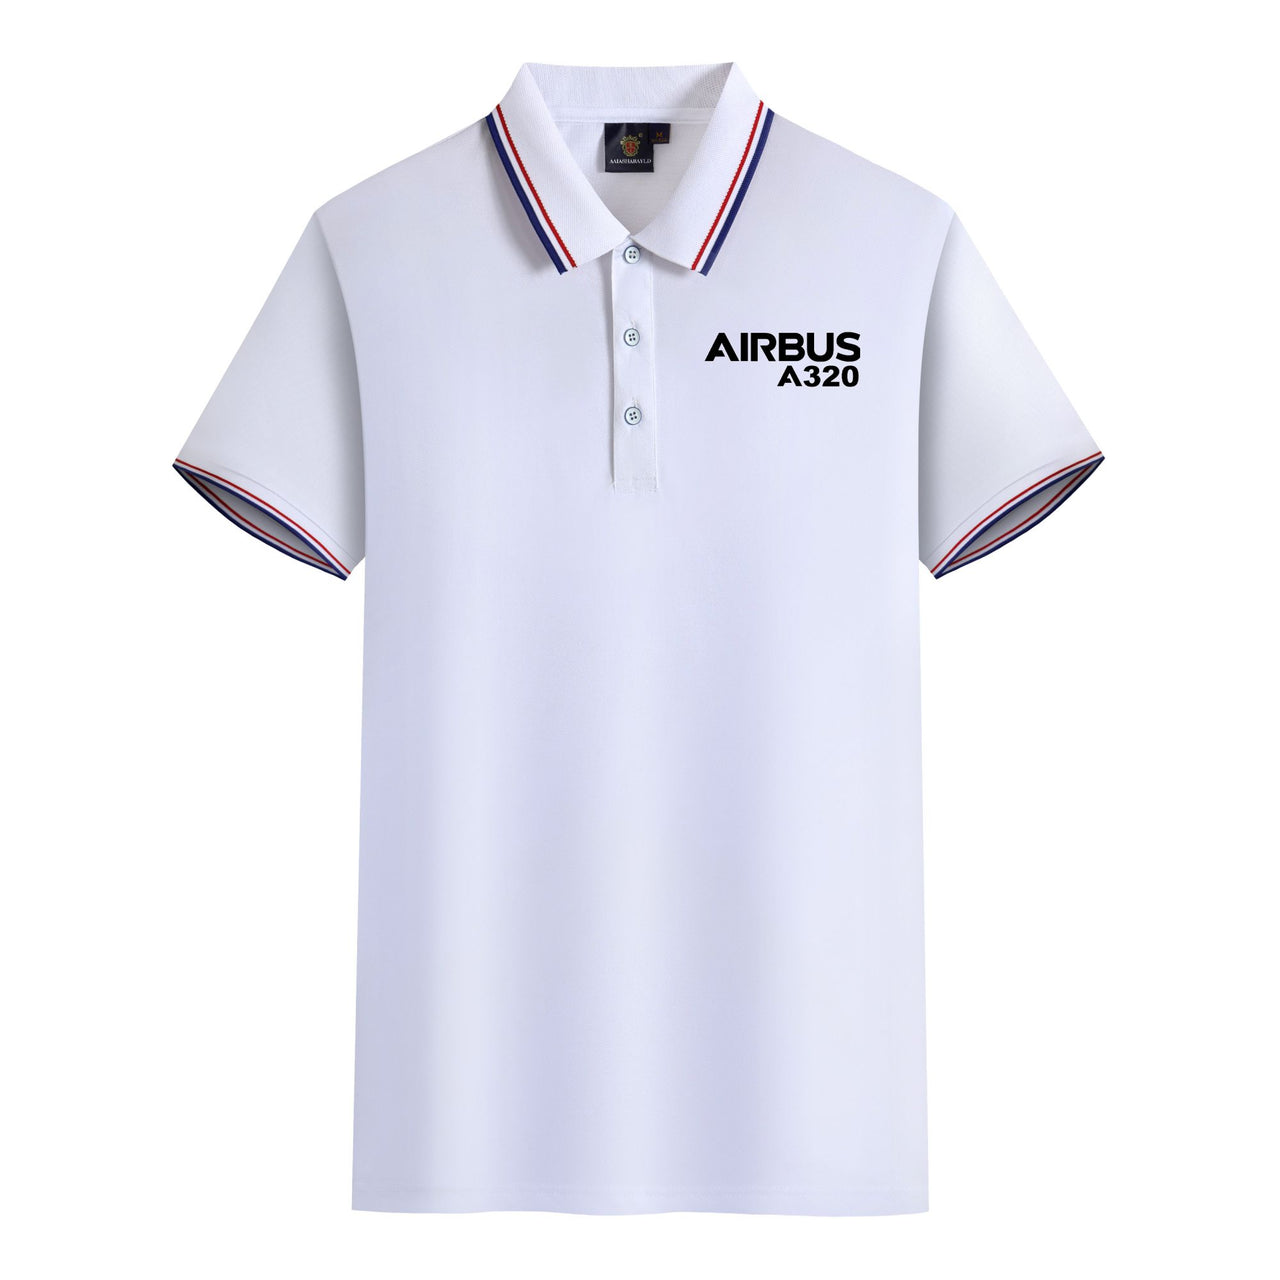 Airbus A320 & Text Designed Stylish Polo T-Shirts